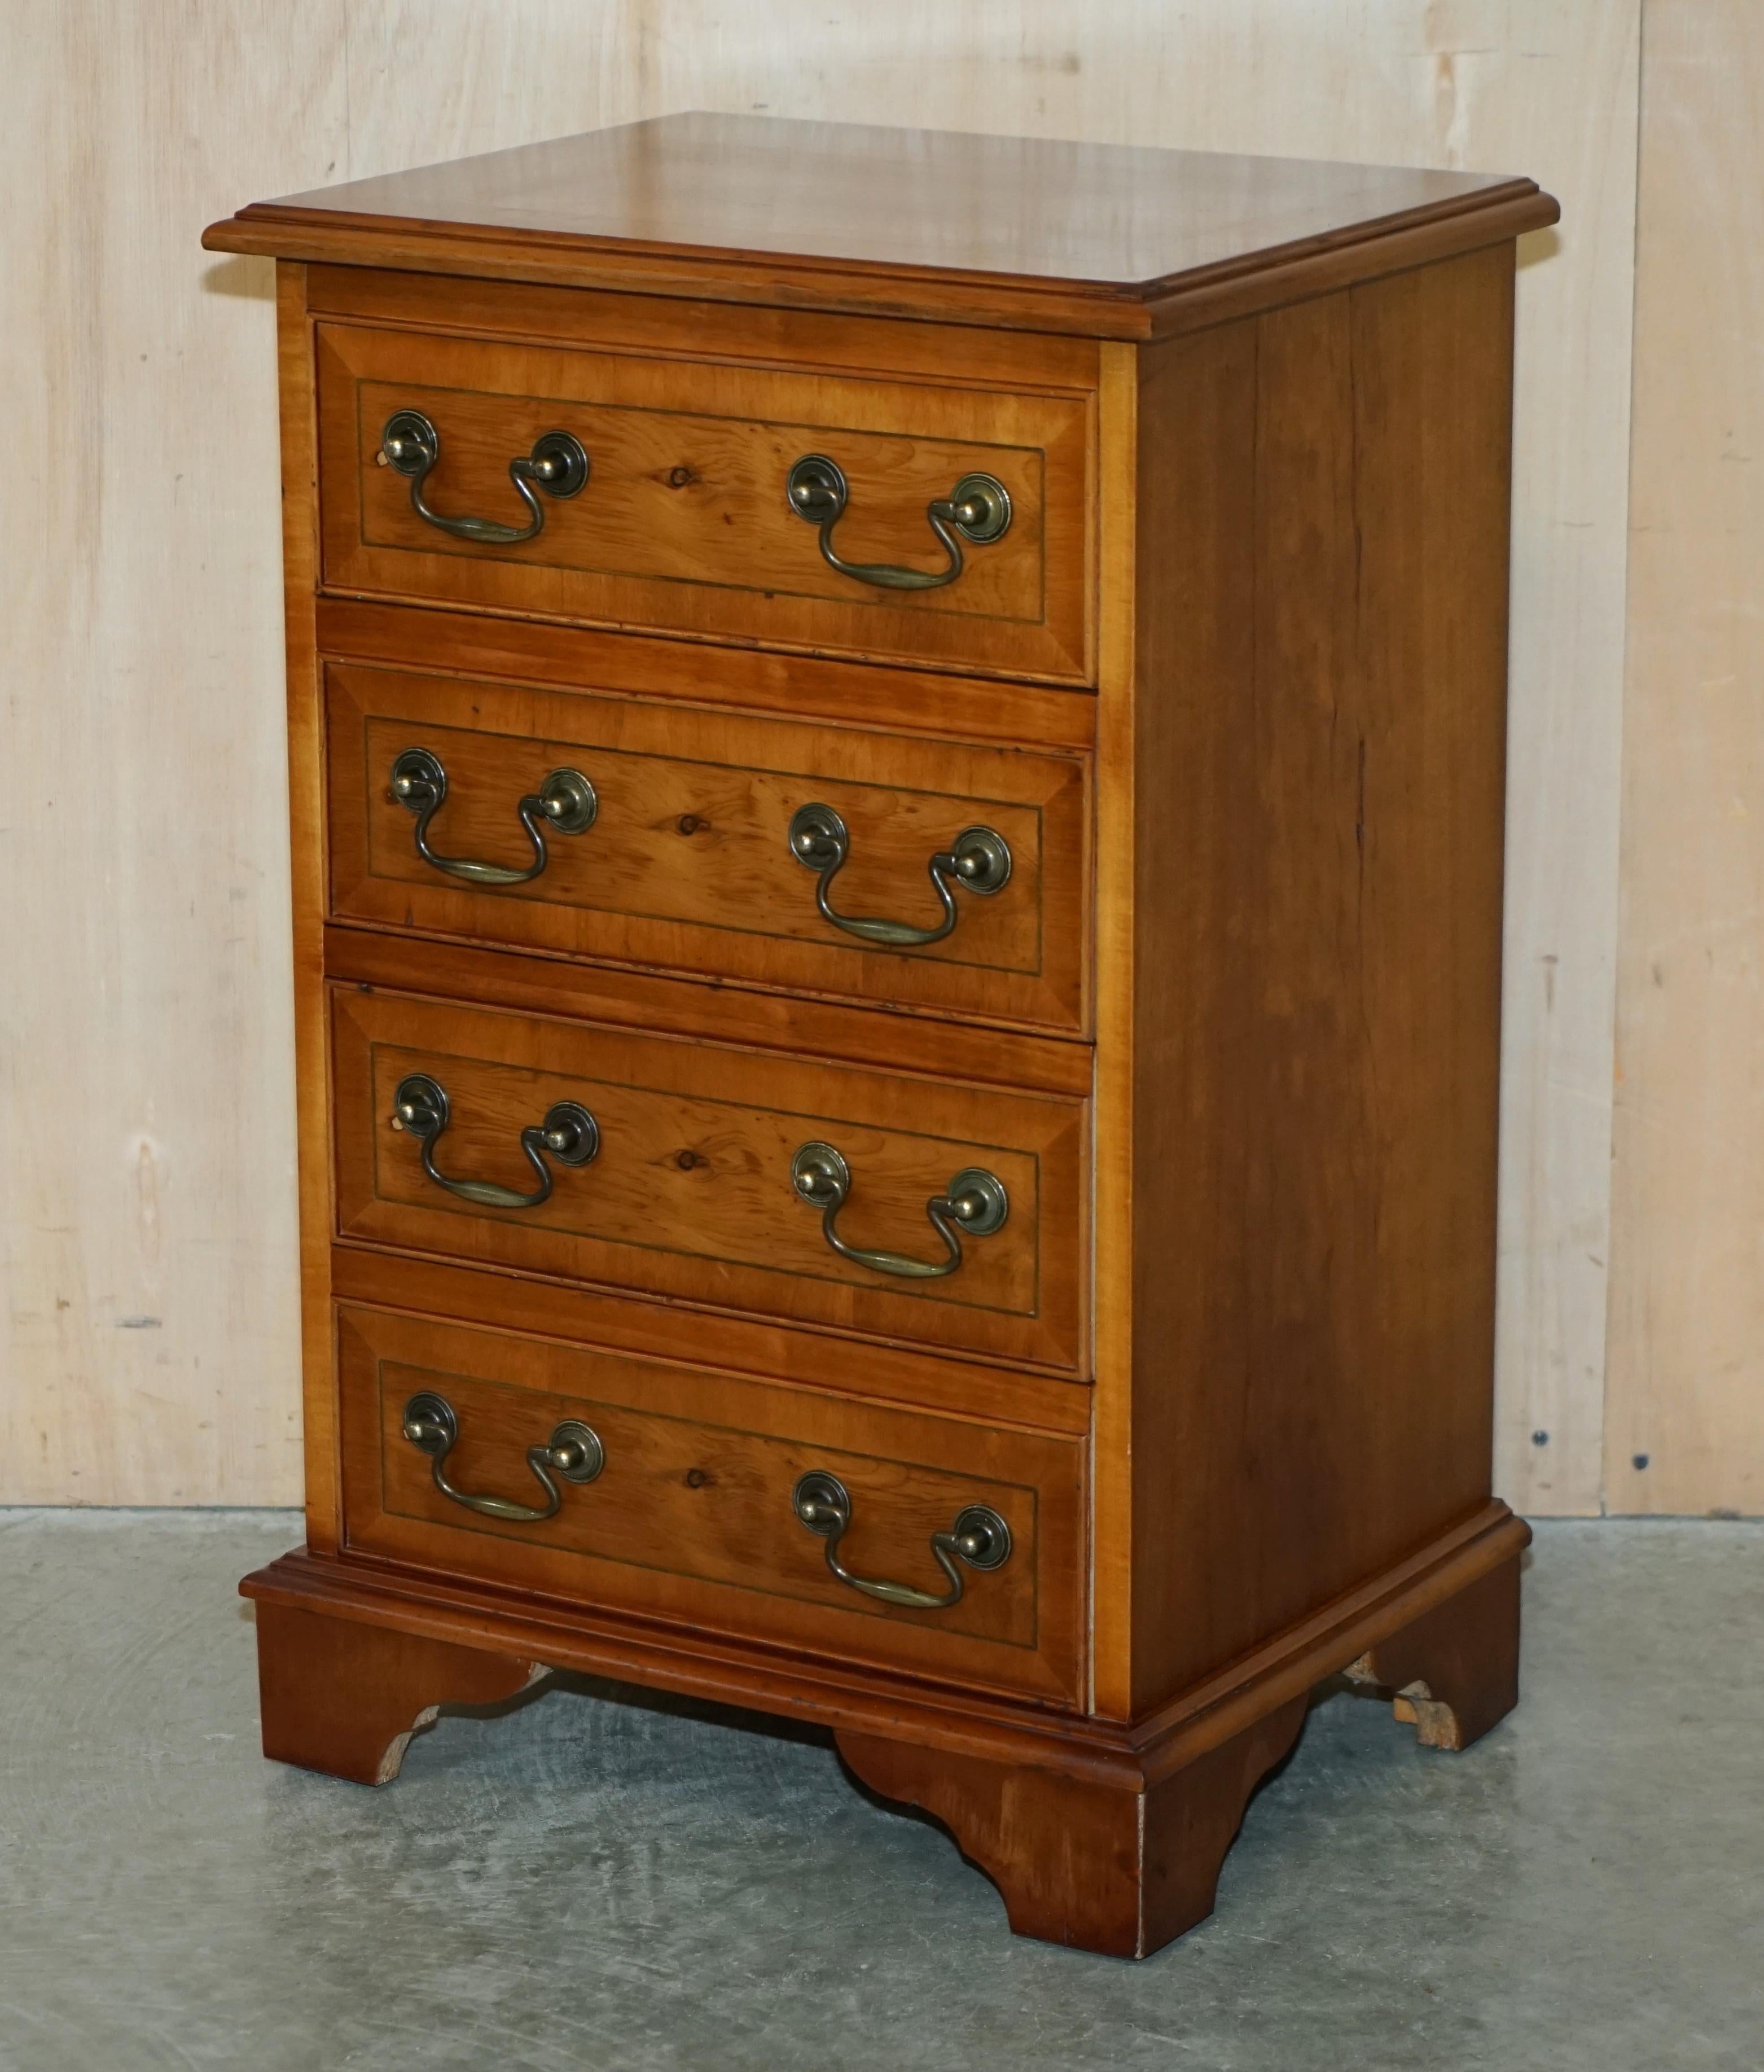 We are delighted to offer for sale this lovely pair of Burr & Burl yew wood, nightstand, bedside table sized chests of drawers

A good looking well made and utilitarian pair, they can sit in just about any room of the house and be useful, the